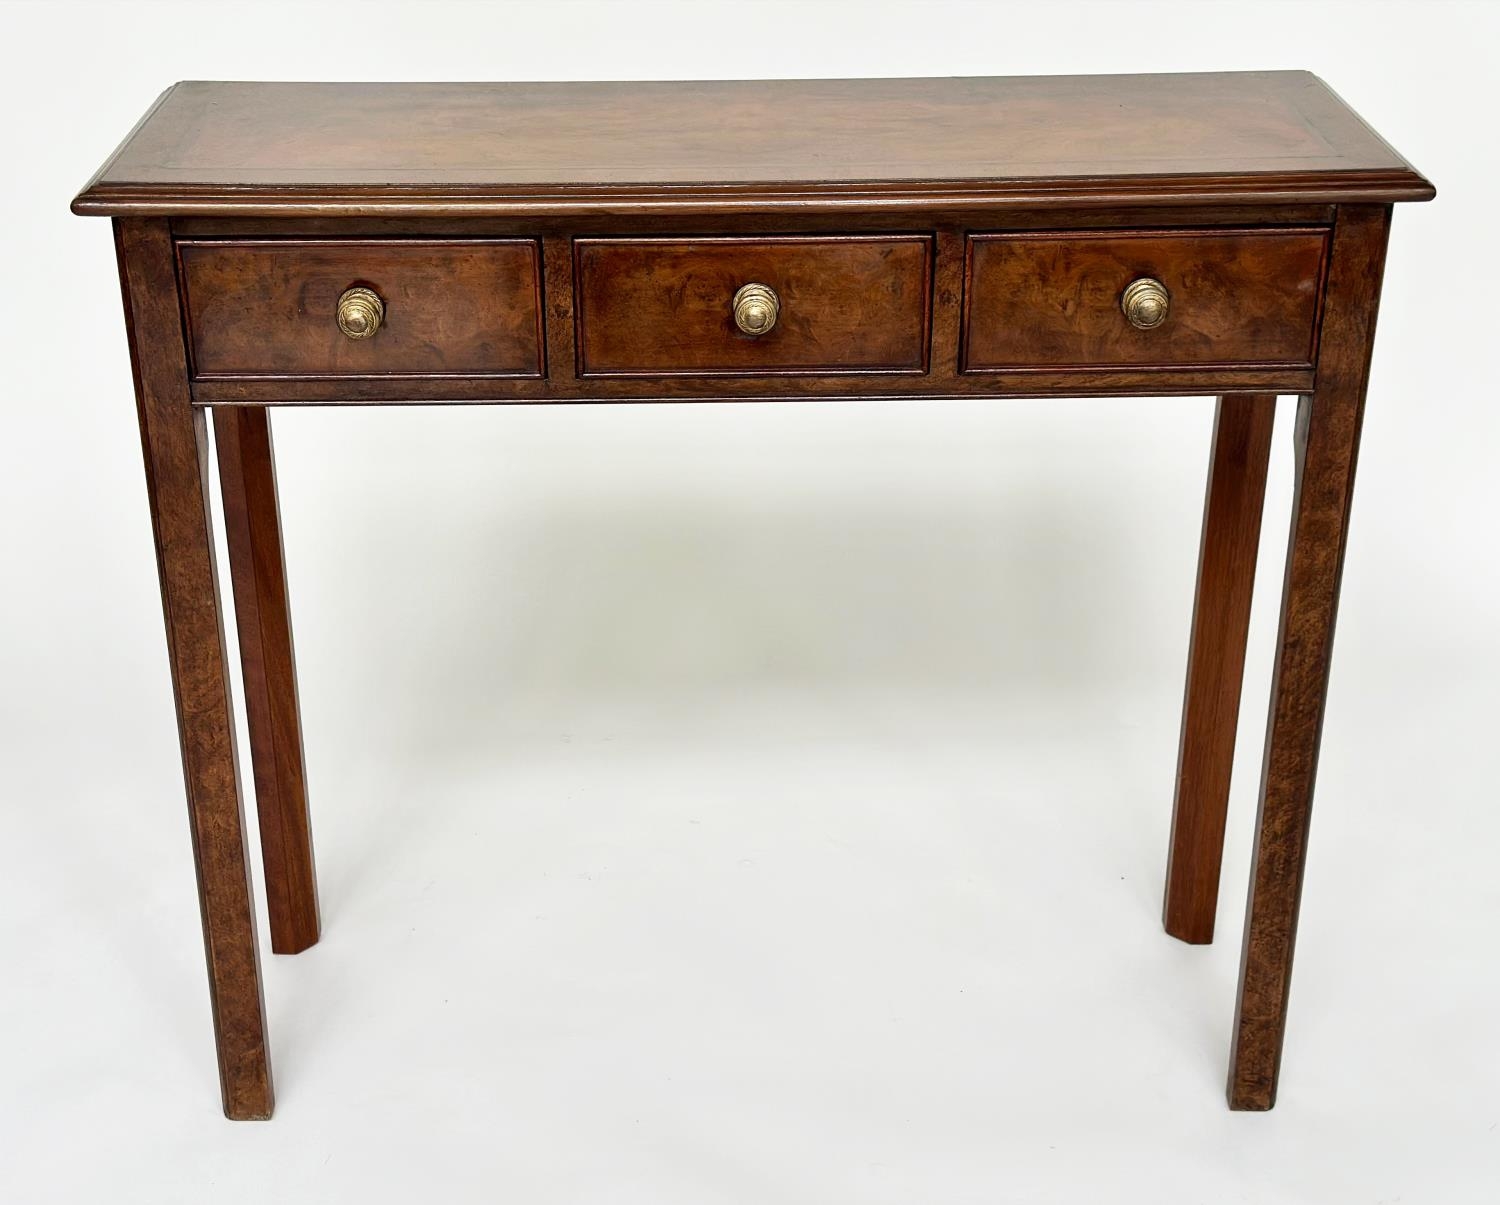 HALL TABLE, George III design burr walnut and crossbanded with three frieze drawers and tapering - Image 9 of 9